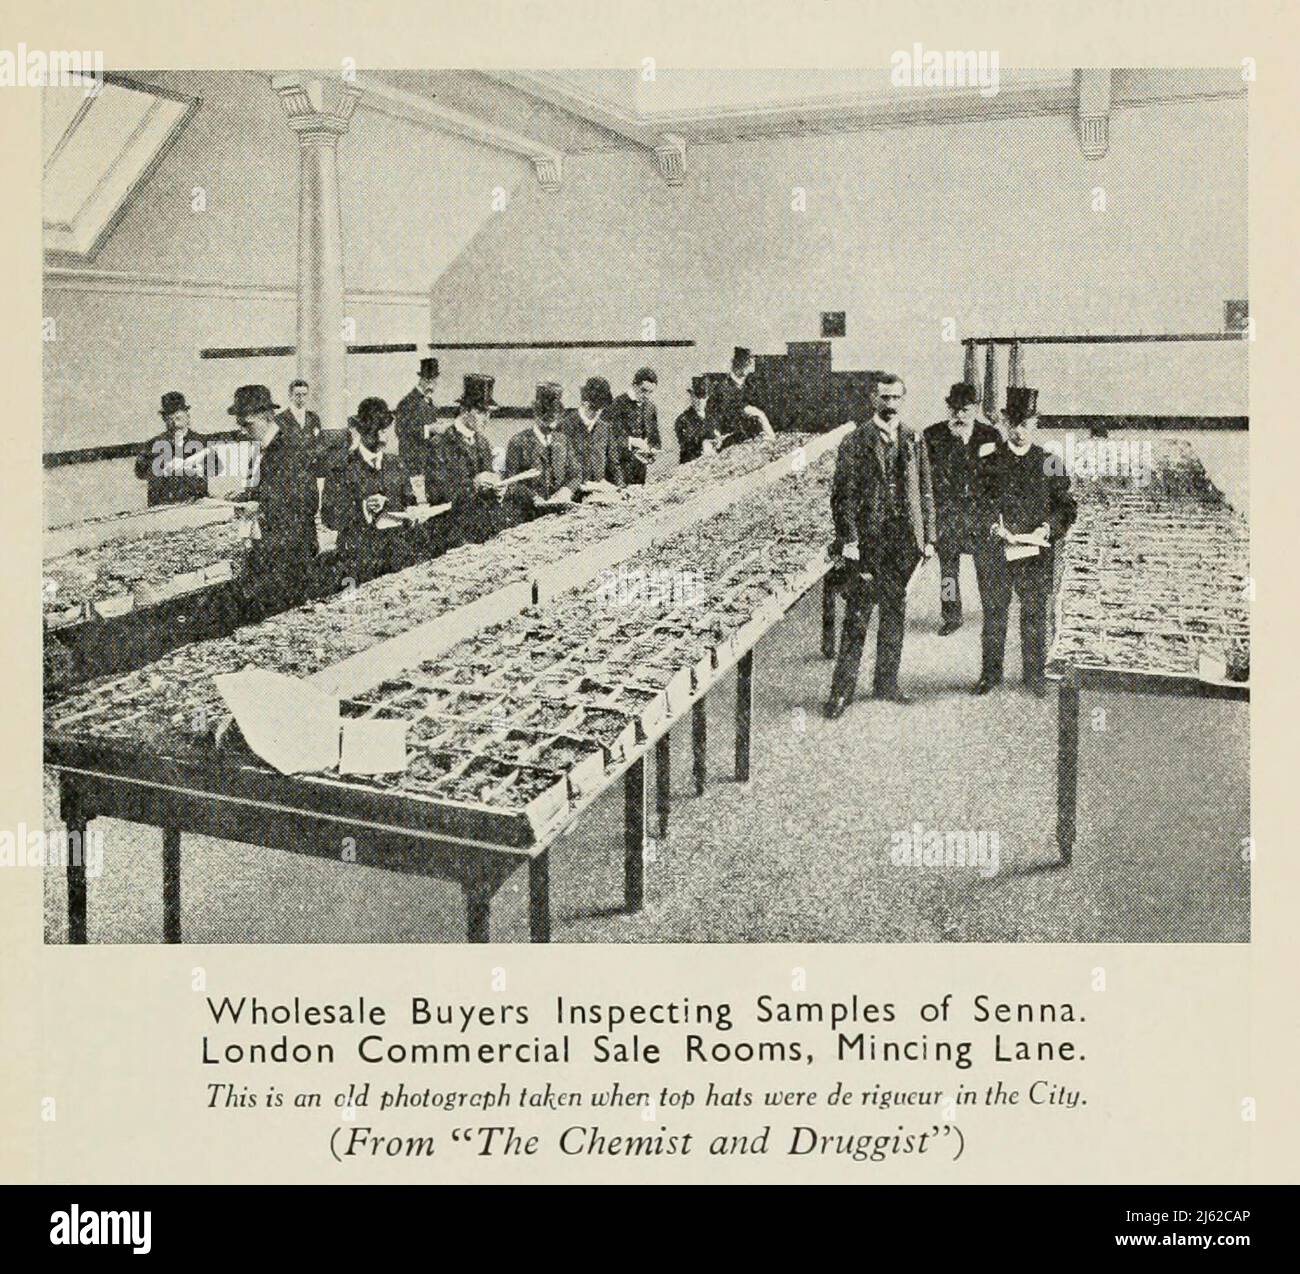 Wholesale Buyers Inspecting Samples of Senna. London Commercial Sale Rooms, Mincing Lane (This is an old photogrcph taken when top hats were de rigueur in the City.) from the book ' The romance of Empire drugs ' Published in London by the Scientific Department at Stafford Allen and Sons, Ltd Stock Photo